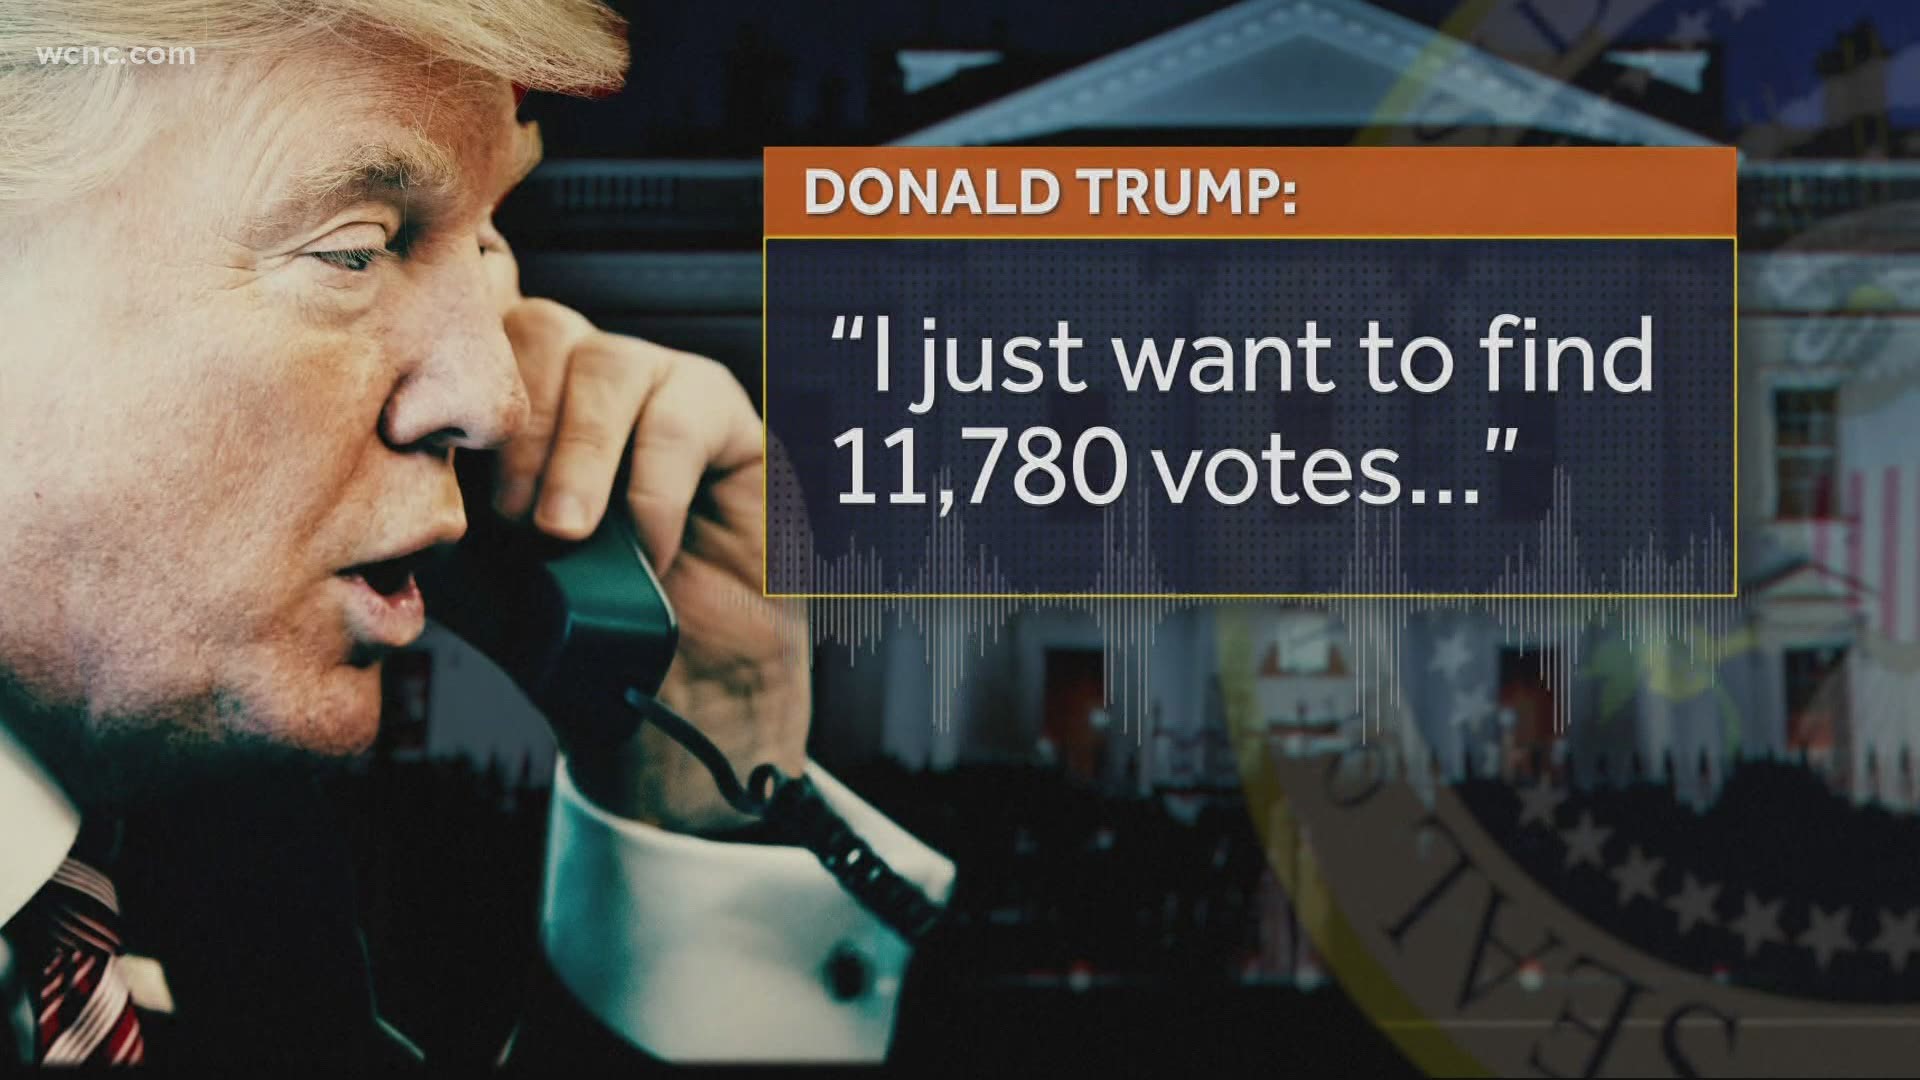 A recording from a government source of President Trump pressuring Brad Raffensperger to "recalculate" the vote count because "I just want to find 11,780 votes."